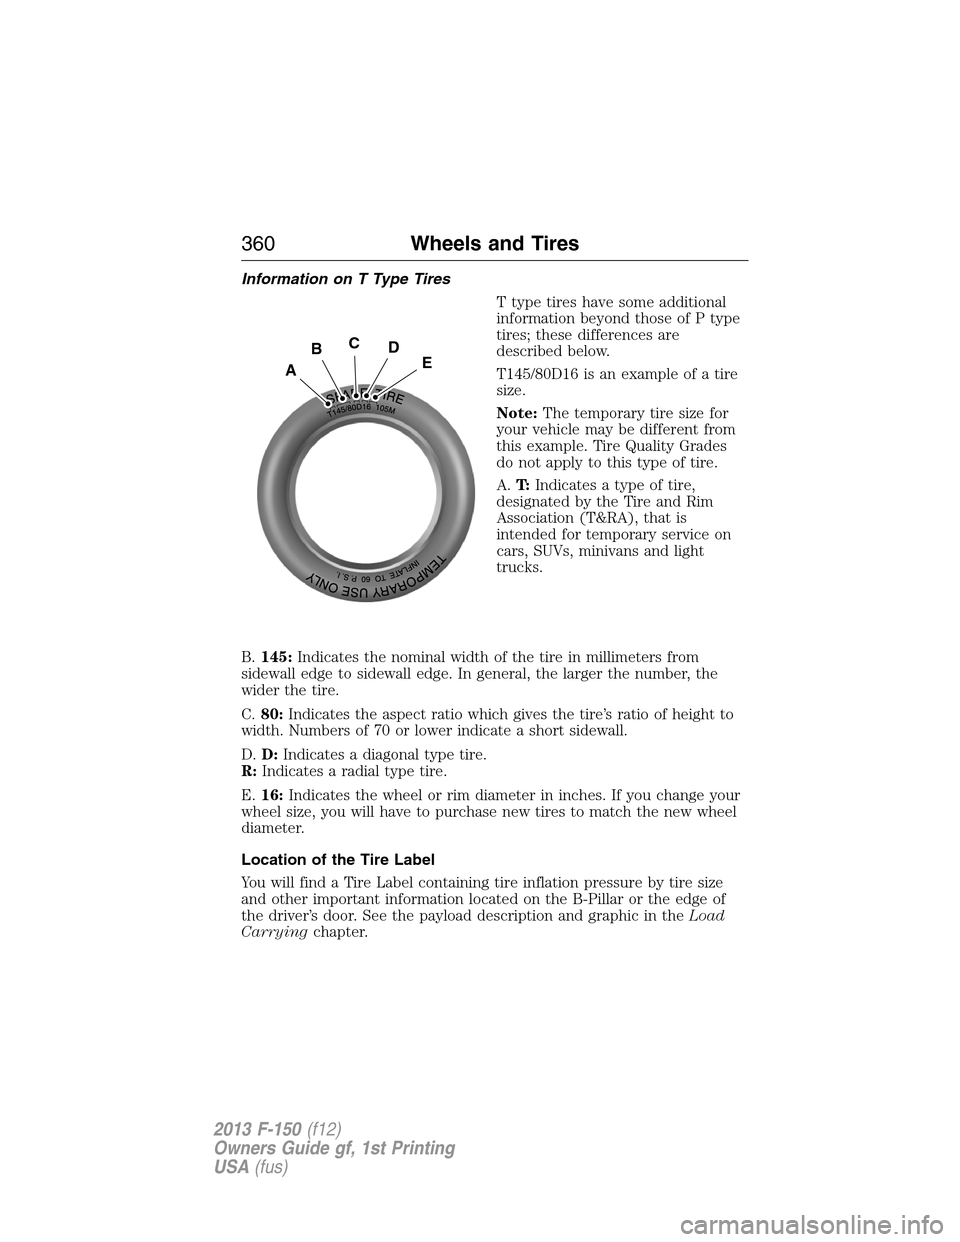 FORD F150 2013 12.G Owners Manual Information on T Type Tires
T type tires have some additional
information beyond those of P type
tires; these differences are
described below.
T145/80D16 is an example of a tire
size.
Note:The tempora